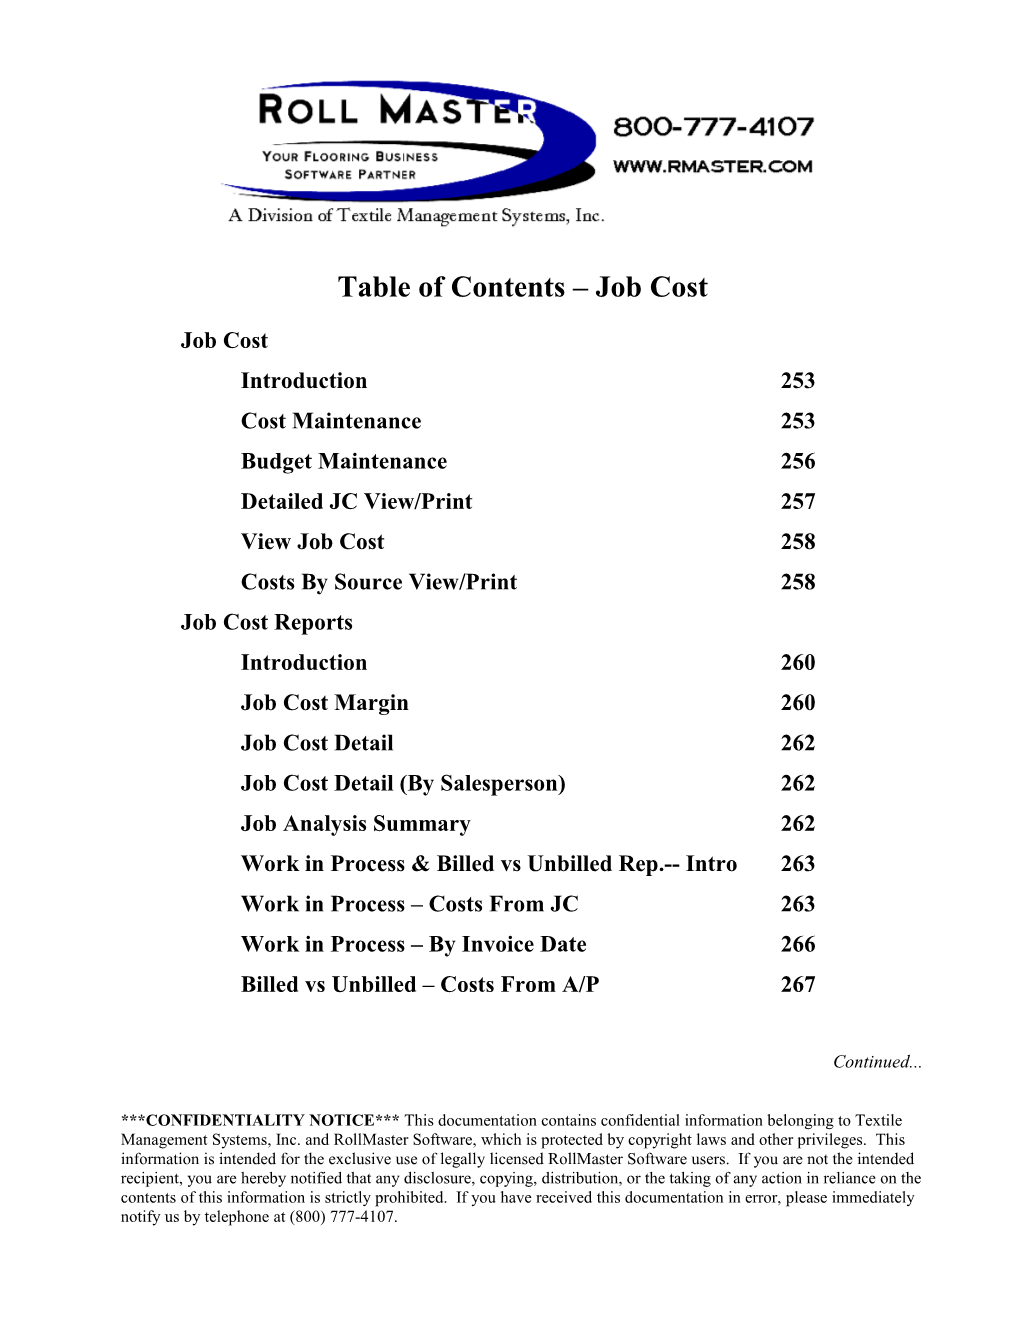 Table of Contents Job Cost